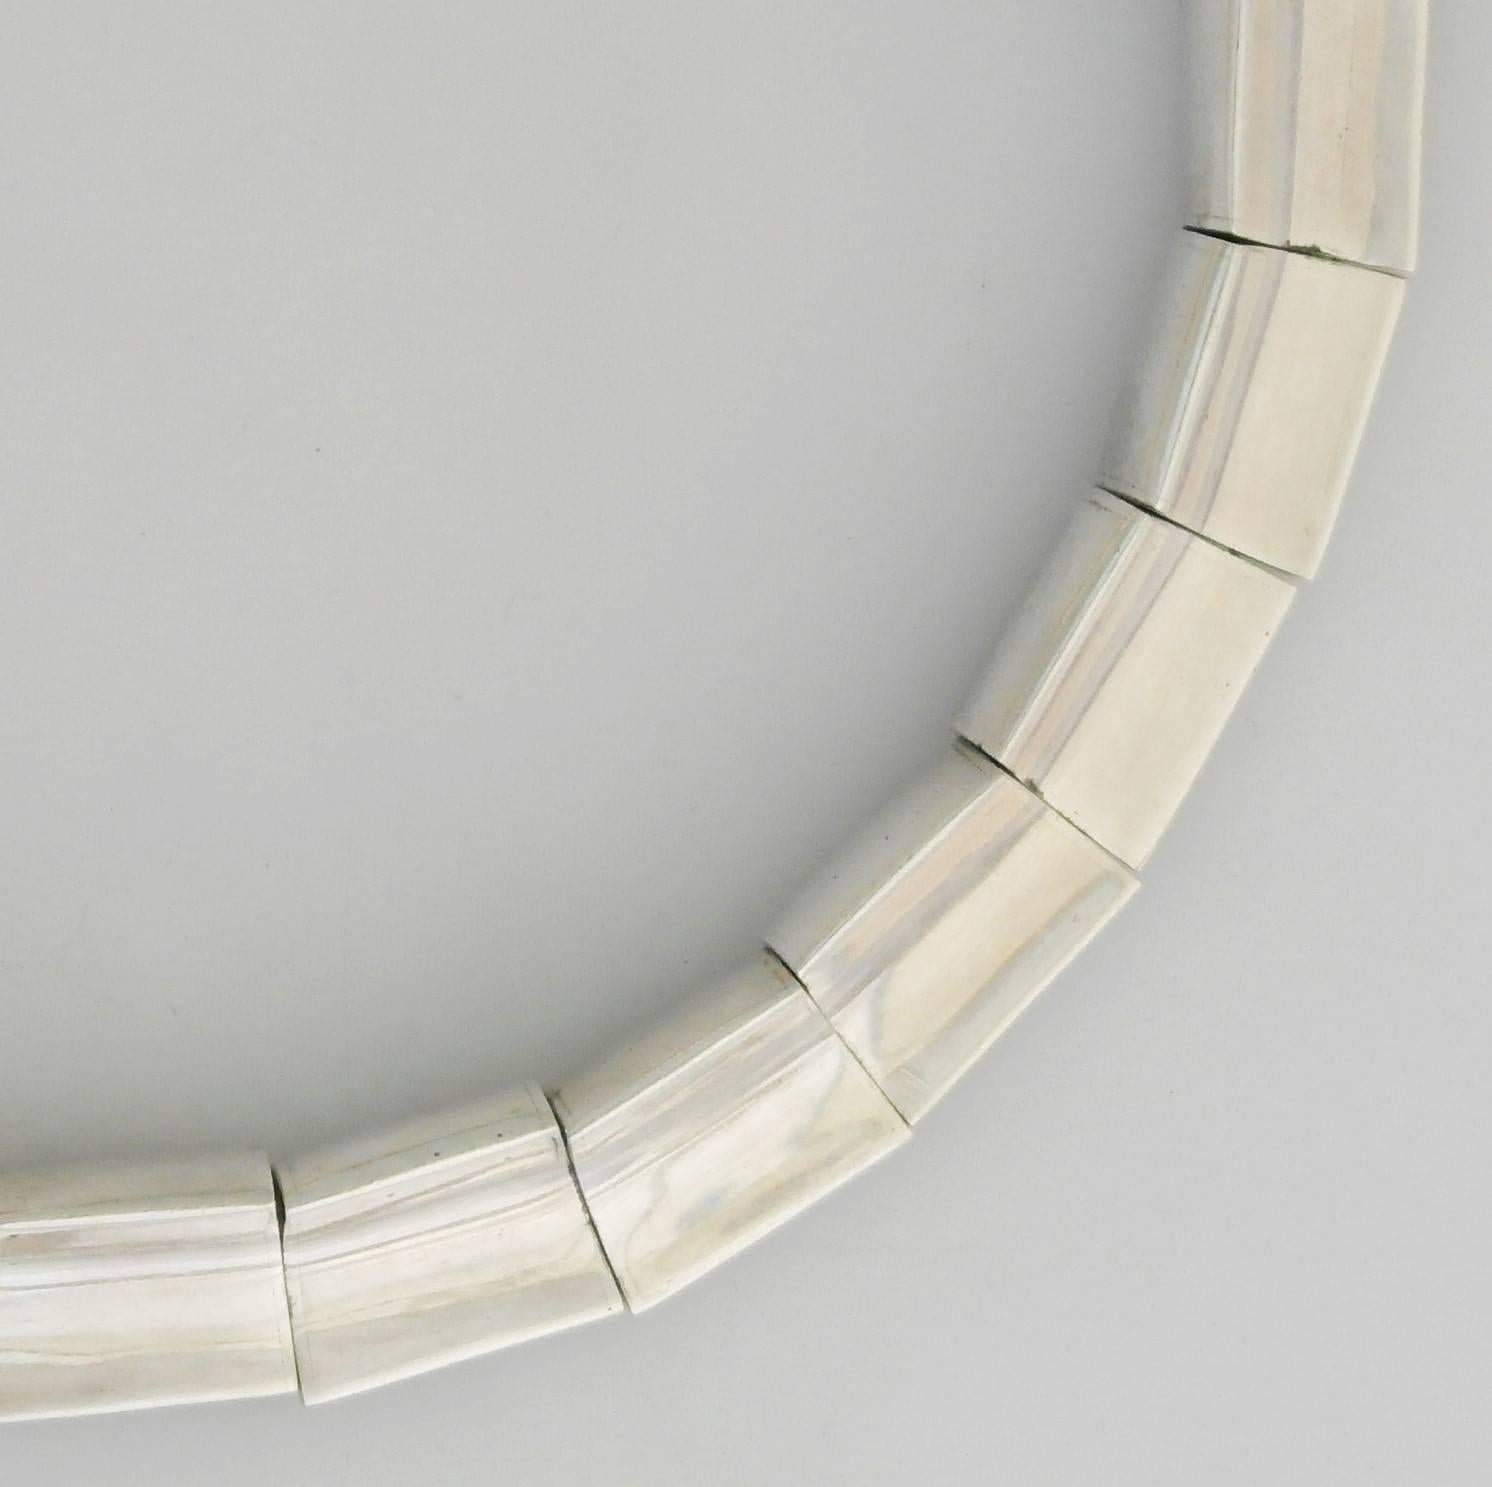 Being offered is a circa 1960 .970 (better than sterling) silver necklace by Antonio Pineda of Taxco, Mexico, choker necklace with concave links supported by a tongue & box closure. Dimensions wearable 14